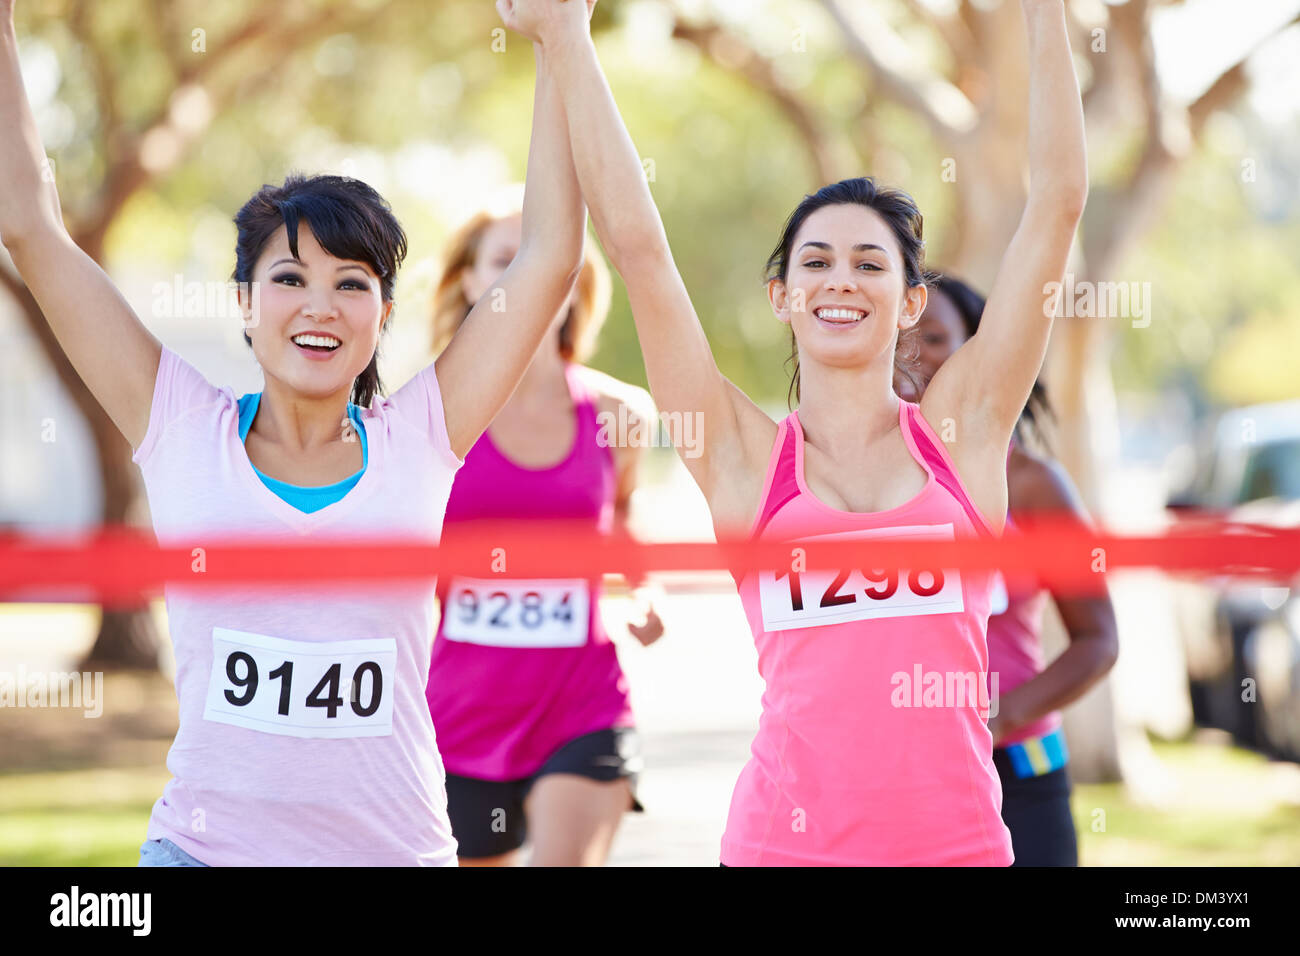 Two Female Runners Finishing Race Together Stock Photo